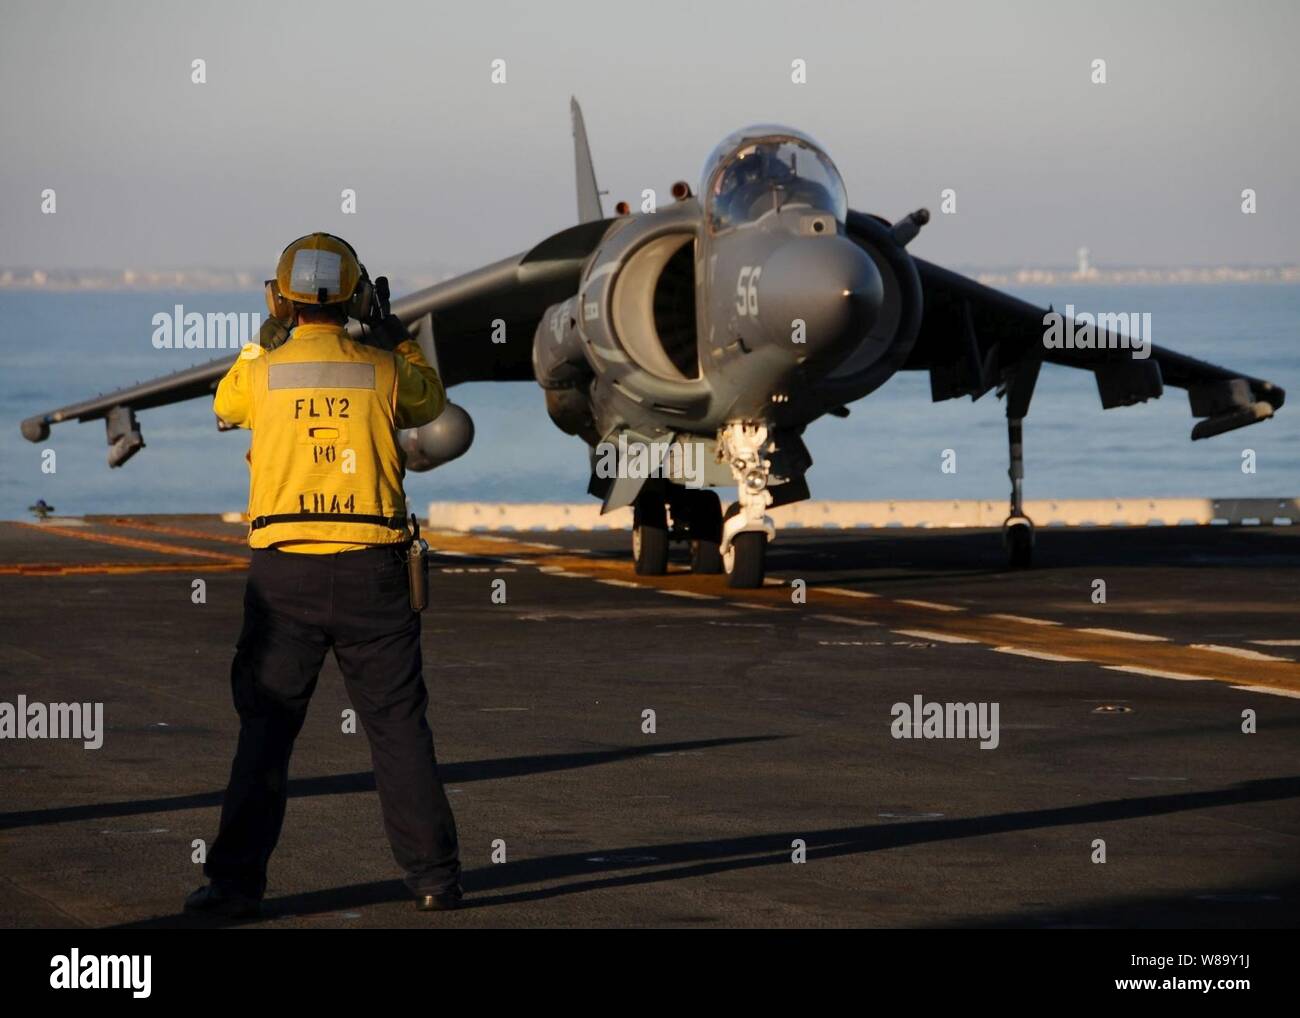 An AV-8B Harrier II vertical short takeoff and landing jet powers up its engines before taking off from the flight deck of the amphibious assault ship USS Nassau (LHA 4) in the Atlantic Ocean on Dec. 14, 2009.  The Nassau is underway with other elements of the Nassau Amphibious Ready Group and the embarked 24th Marine Expeditionary Unit for a certification exercise. Stock Photo